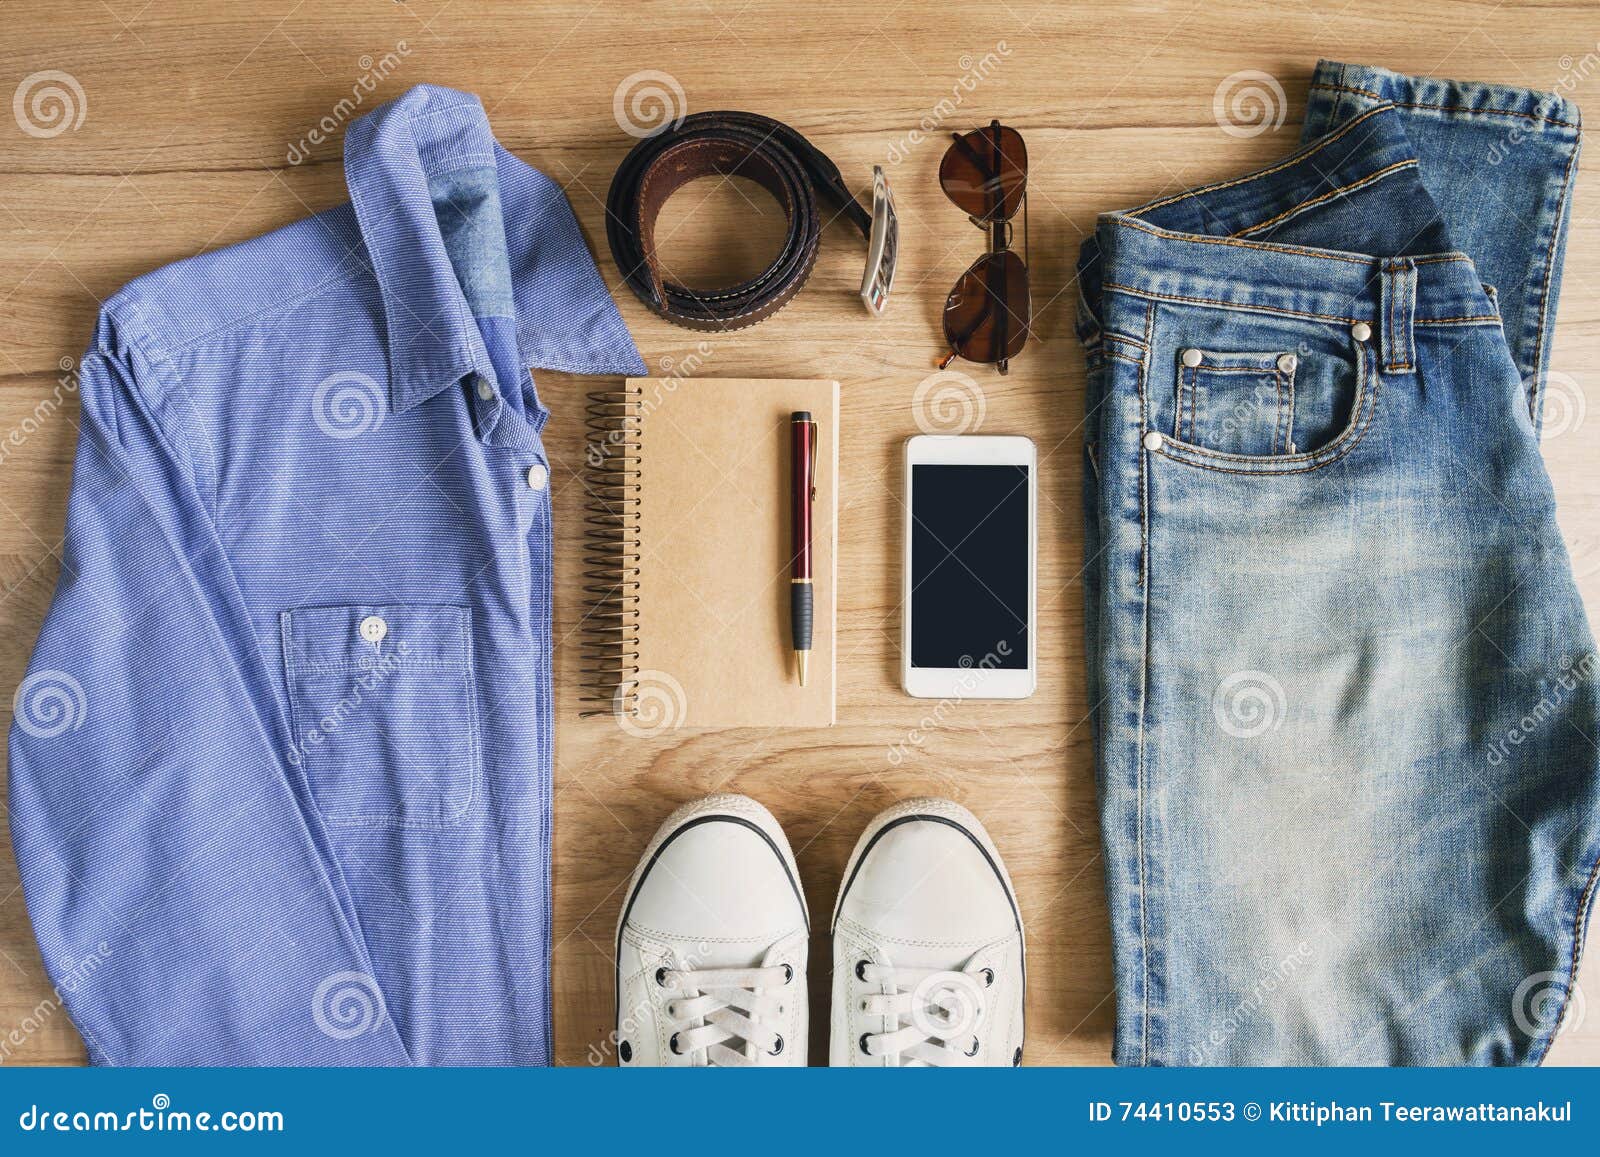 Flat Lay of Men Casual Fashion Outfits on Wooden Background Stock Image ...